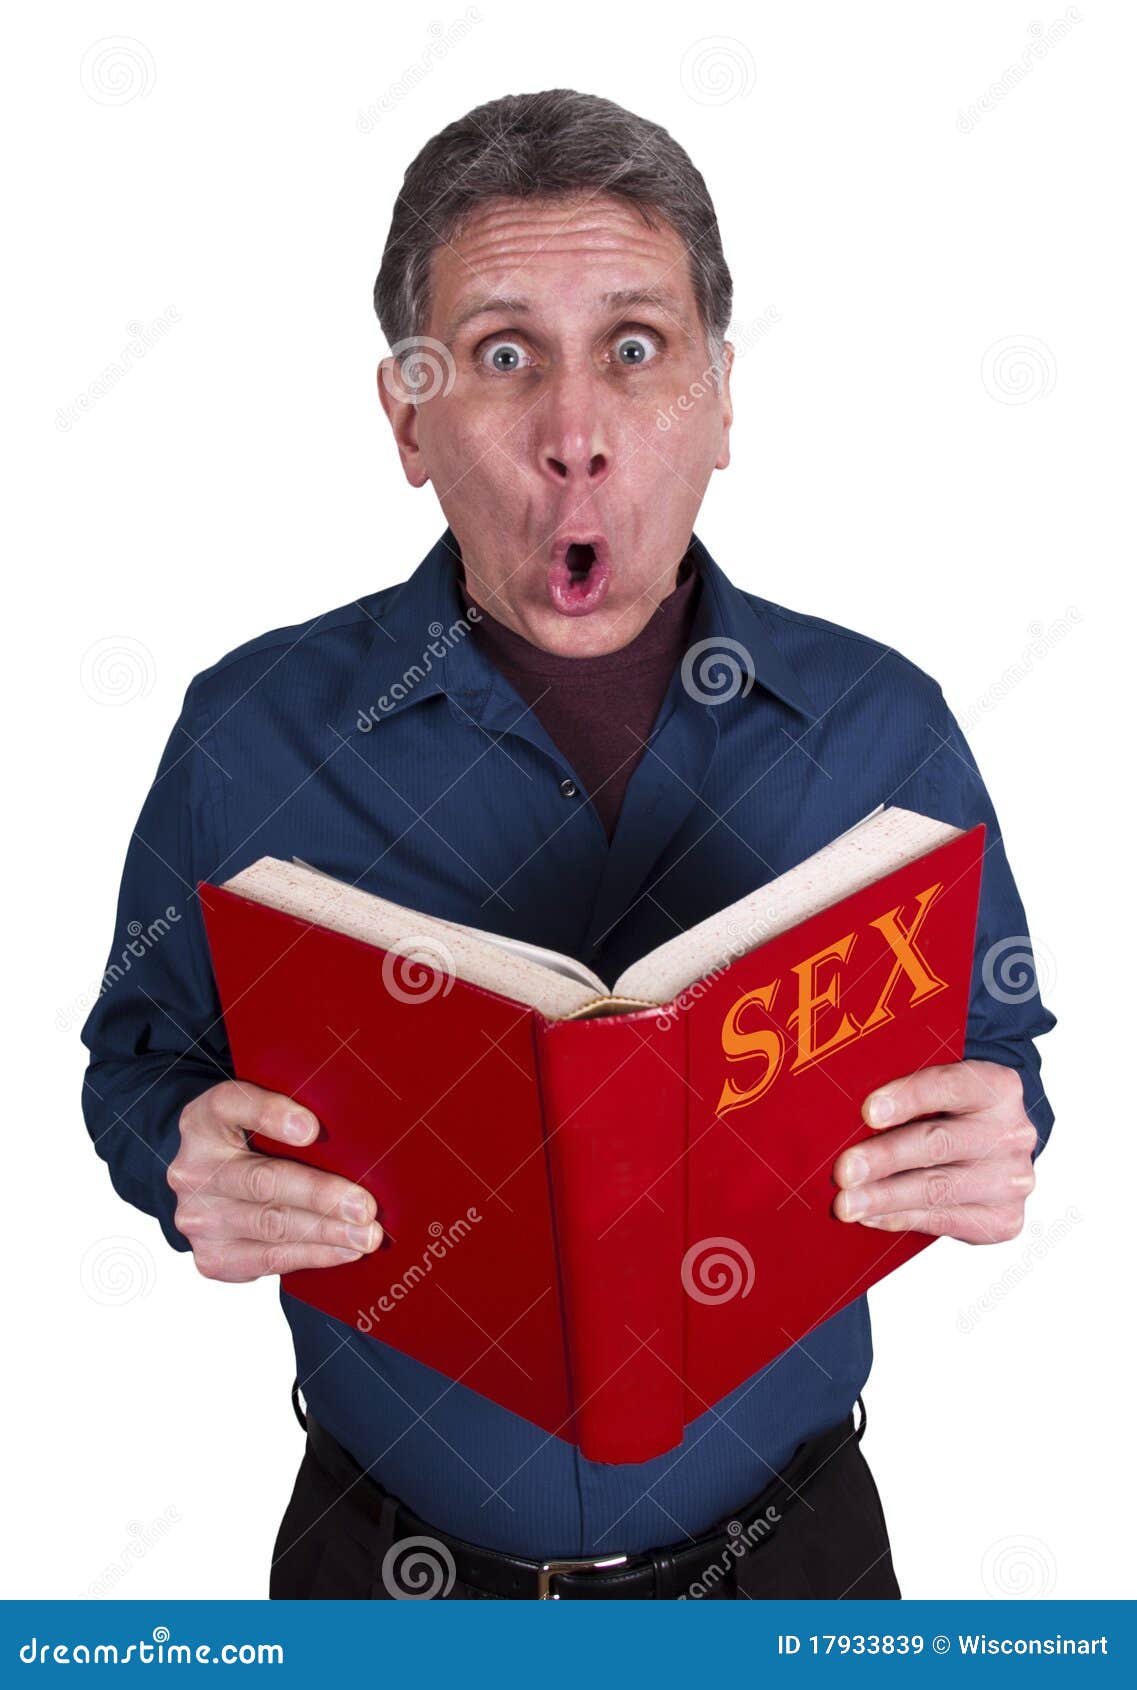 Sex Education Funny Shocked Man Reading Book Royalty Free Stock Images Image 17933839